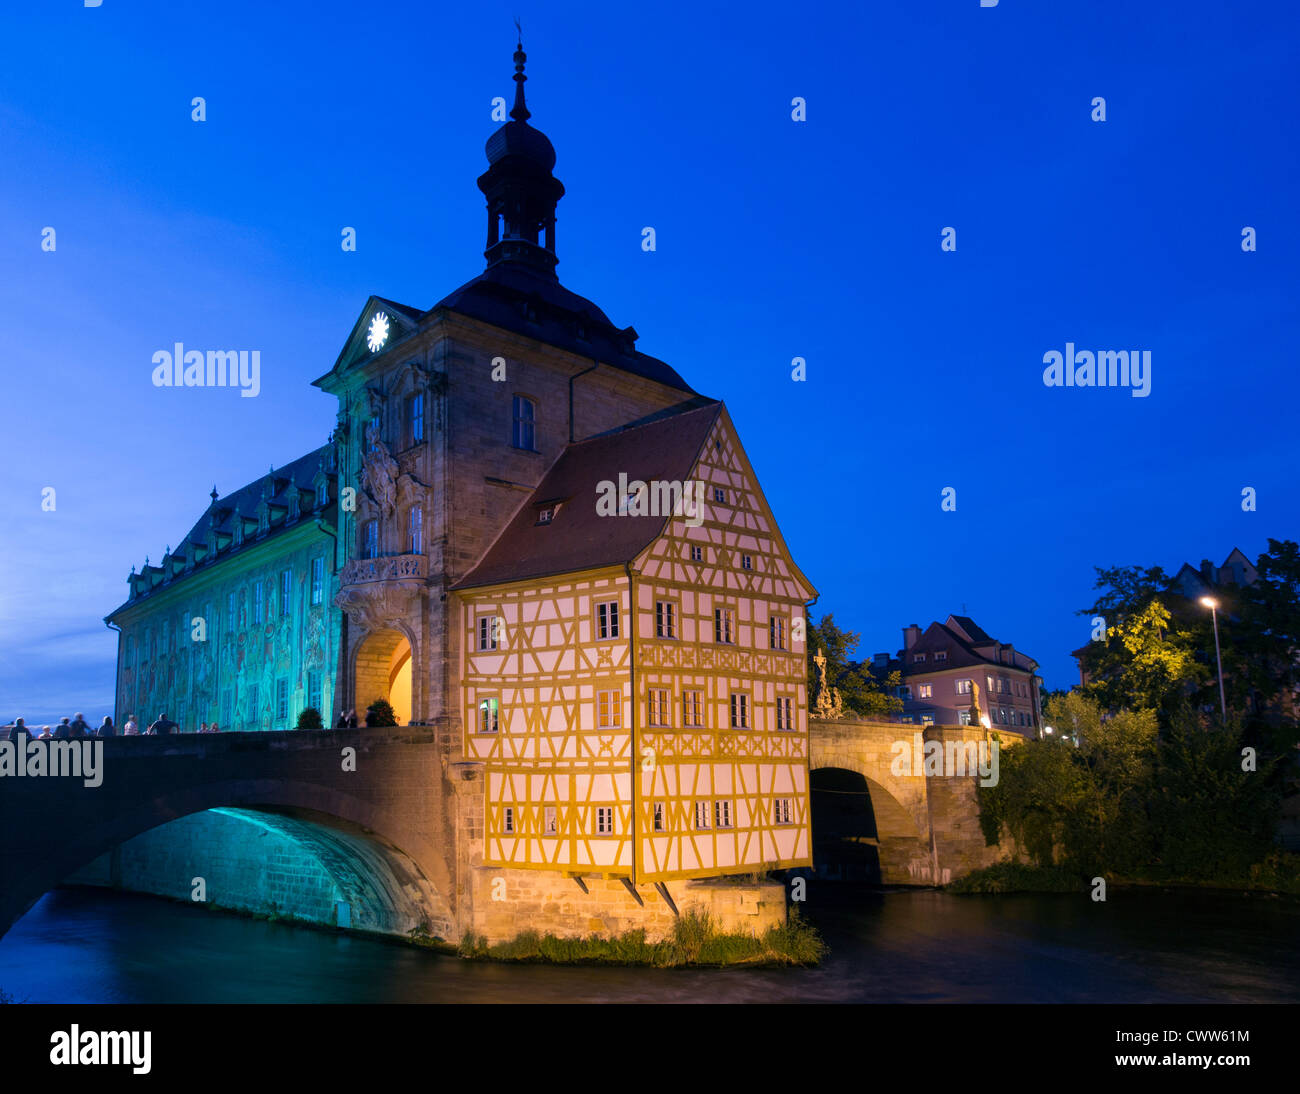 Old town hall or Altes Rathaus in the evening in Bamberg Bavaria Germany Stock Photo